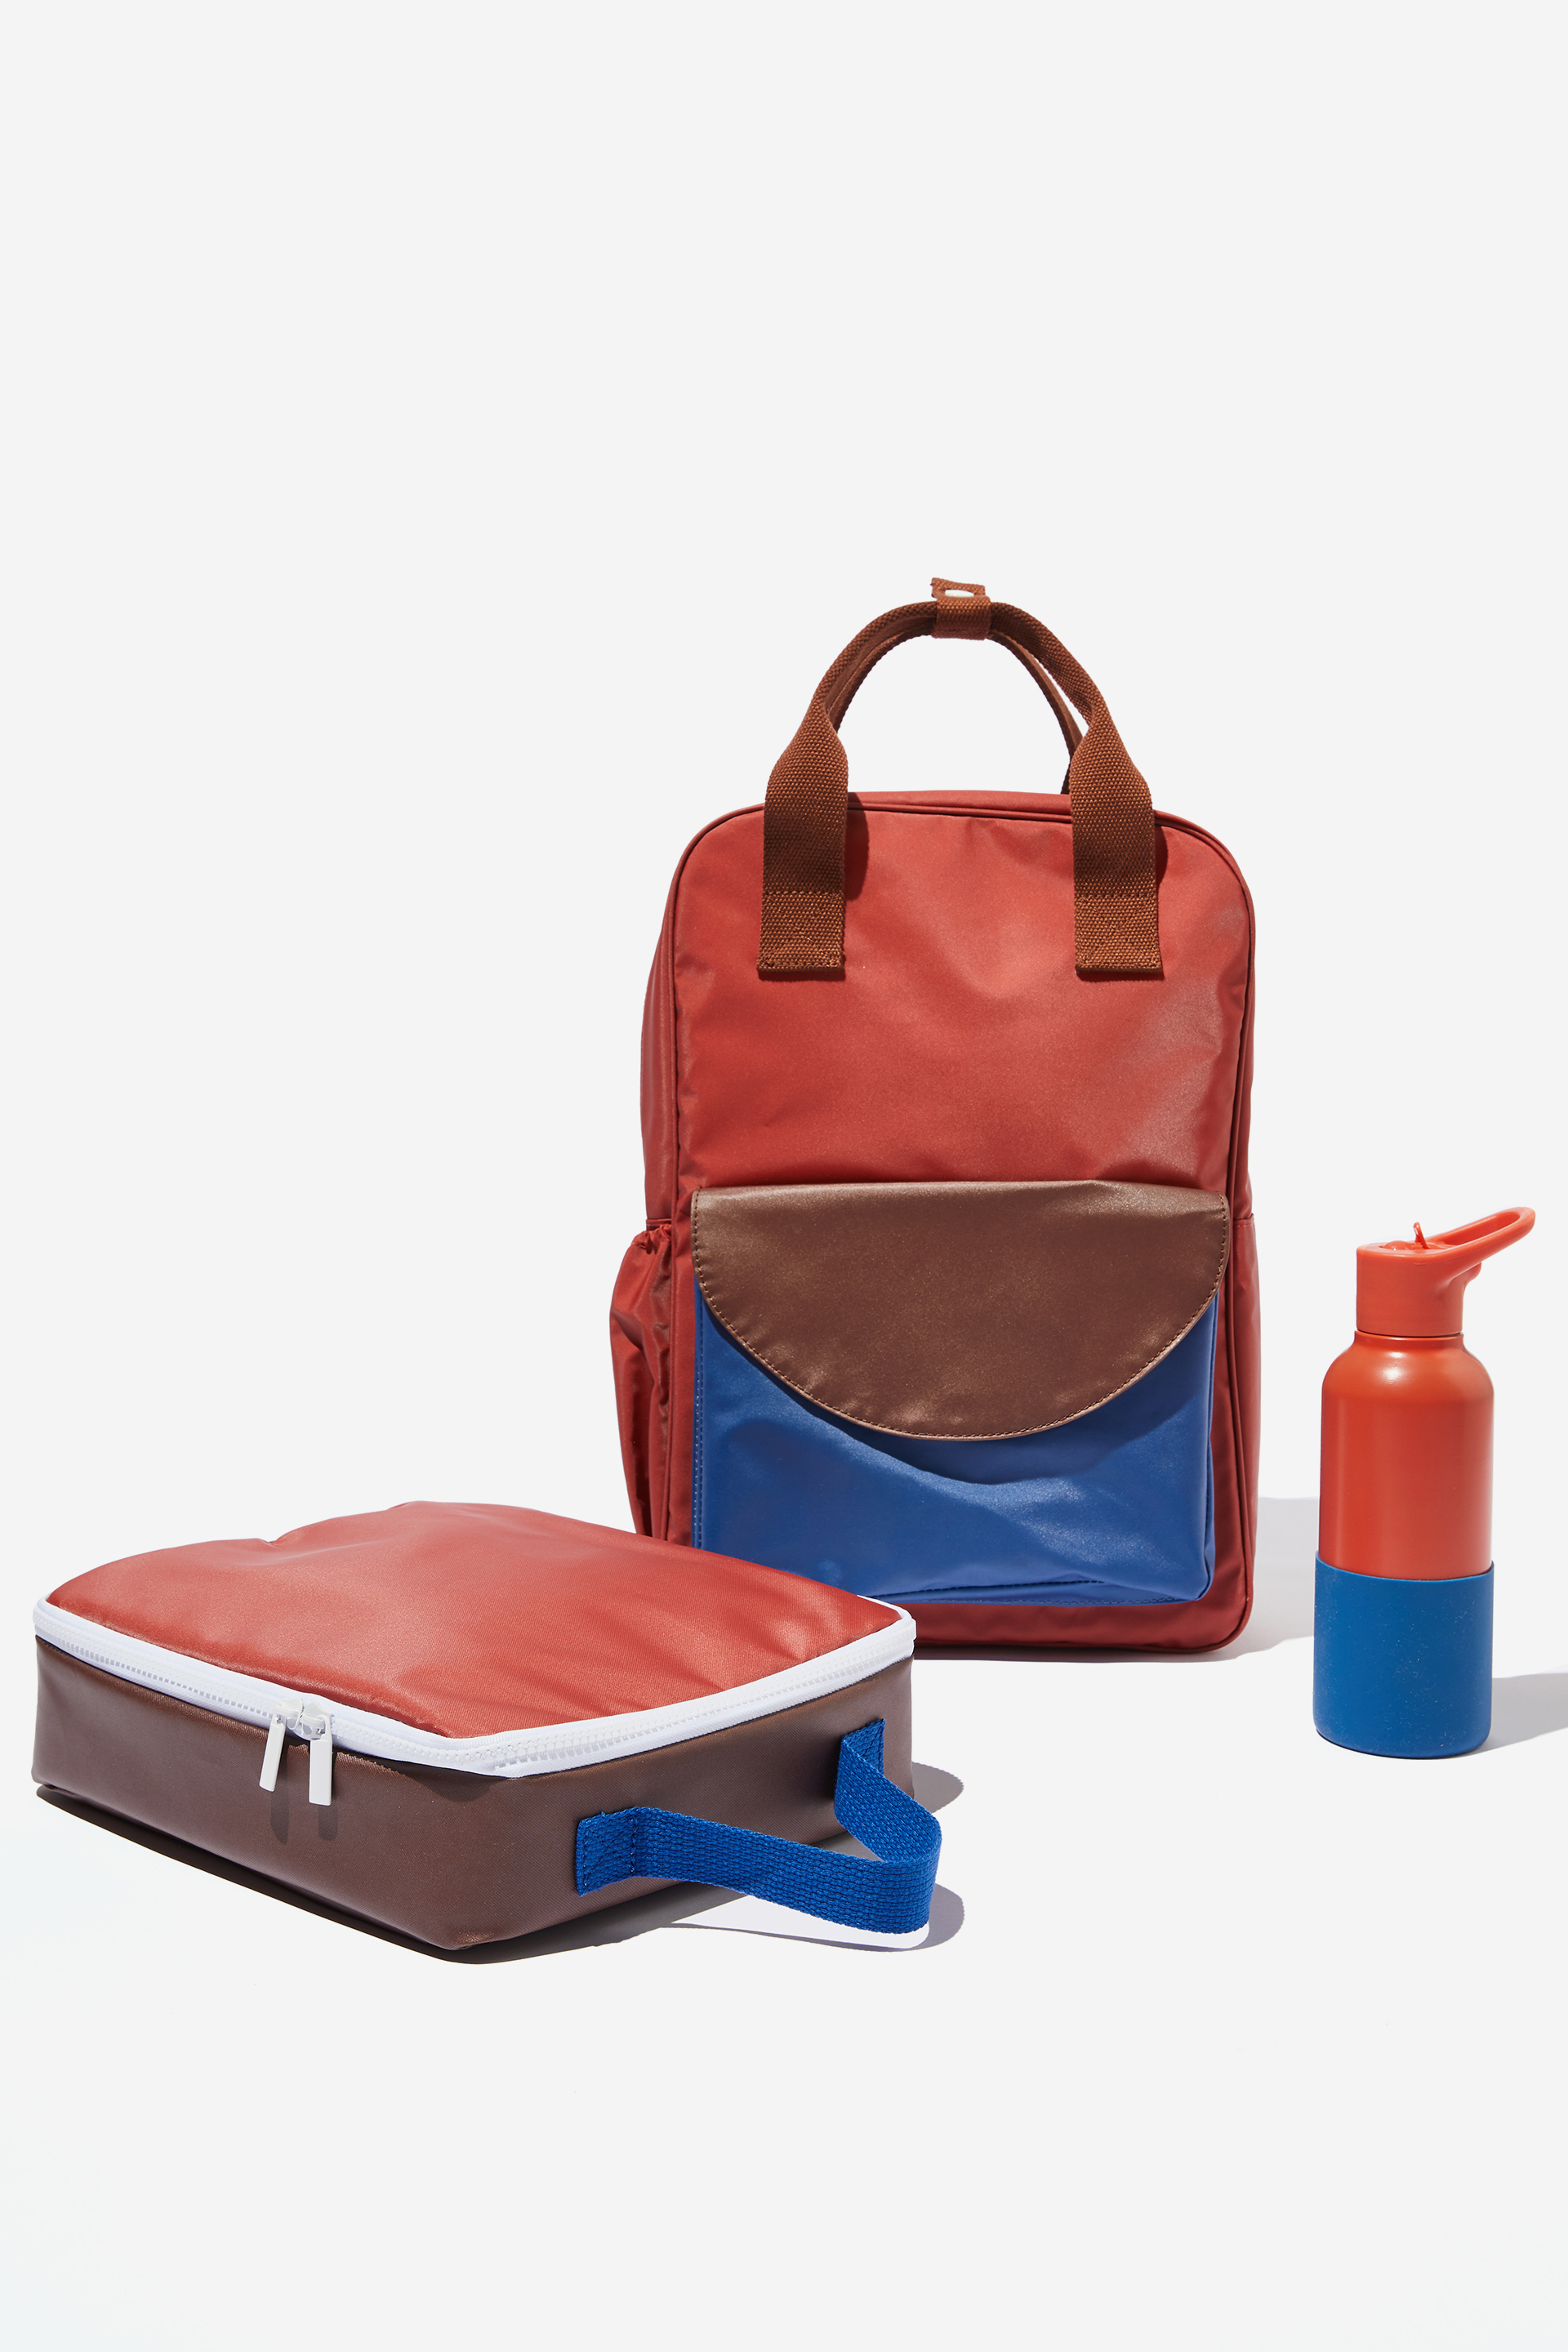 Cotton On Kids - Back To It Backpack and Lunch Bag and Drink Bottle Bundle - Red orange